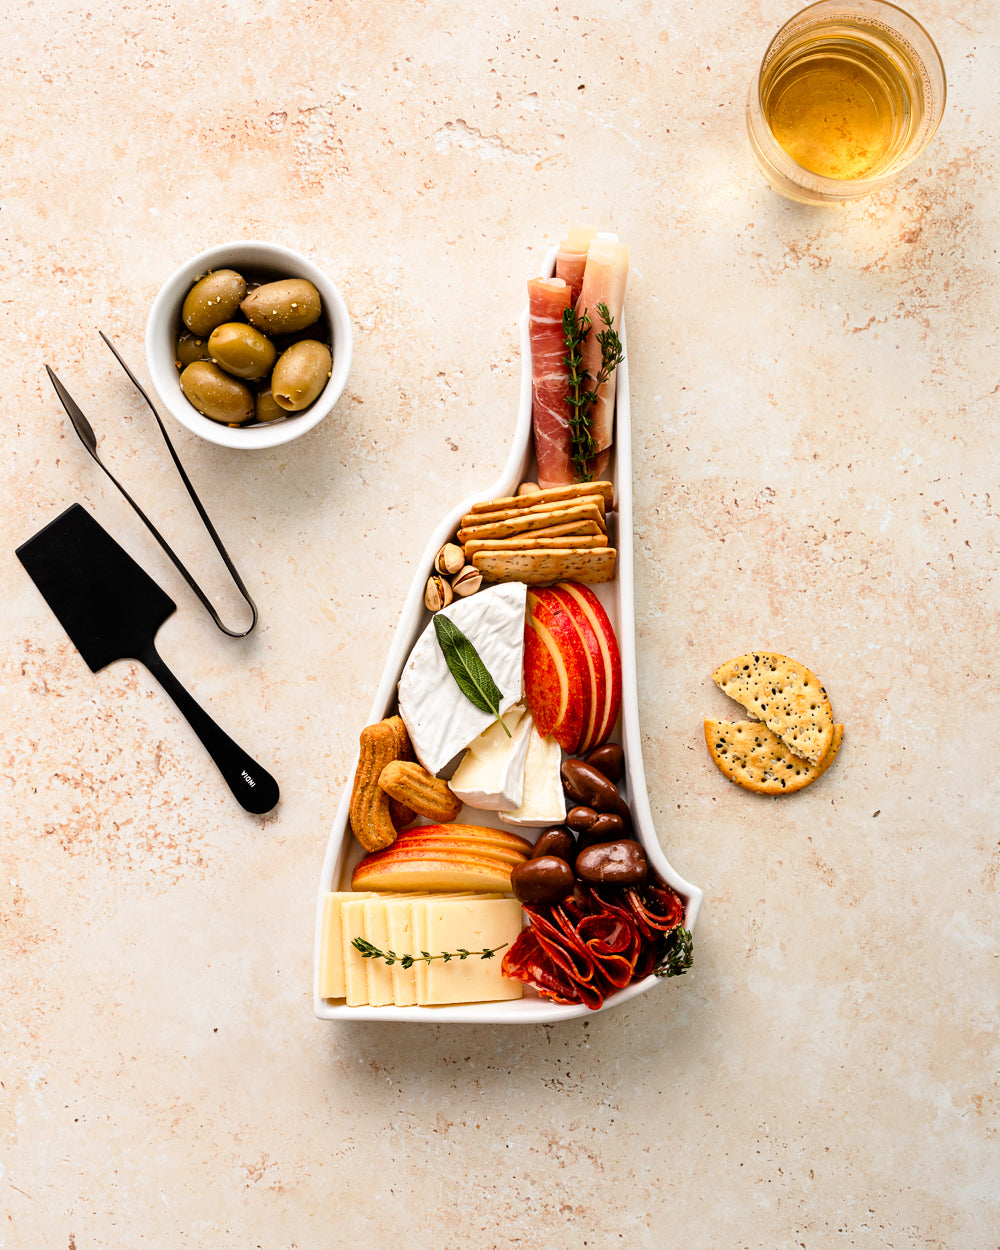 charcuterie board with cheese and cured meats in a New Hampshire shaped serving tray platter dish